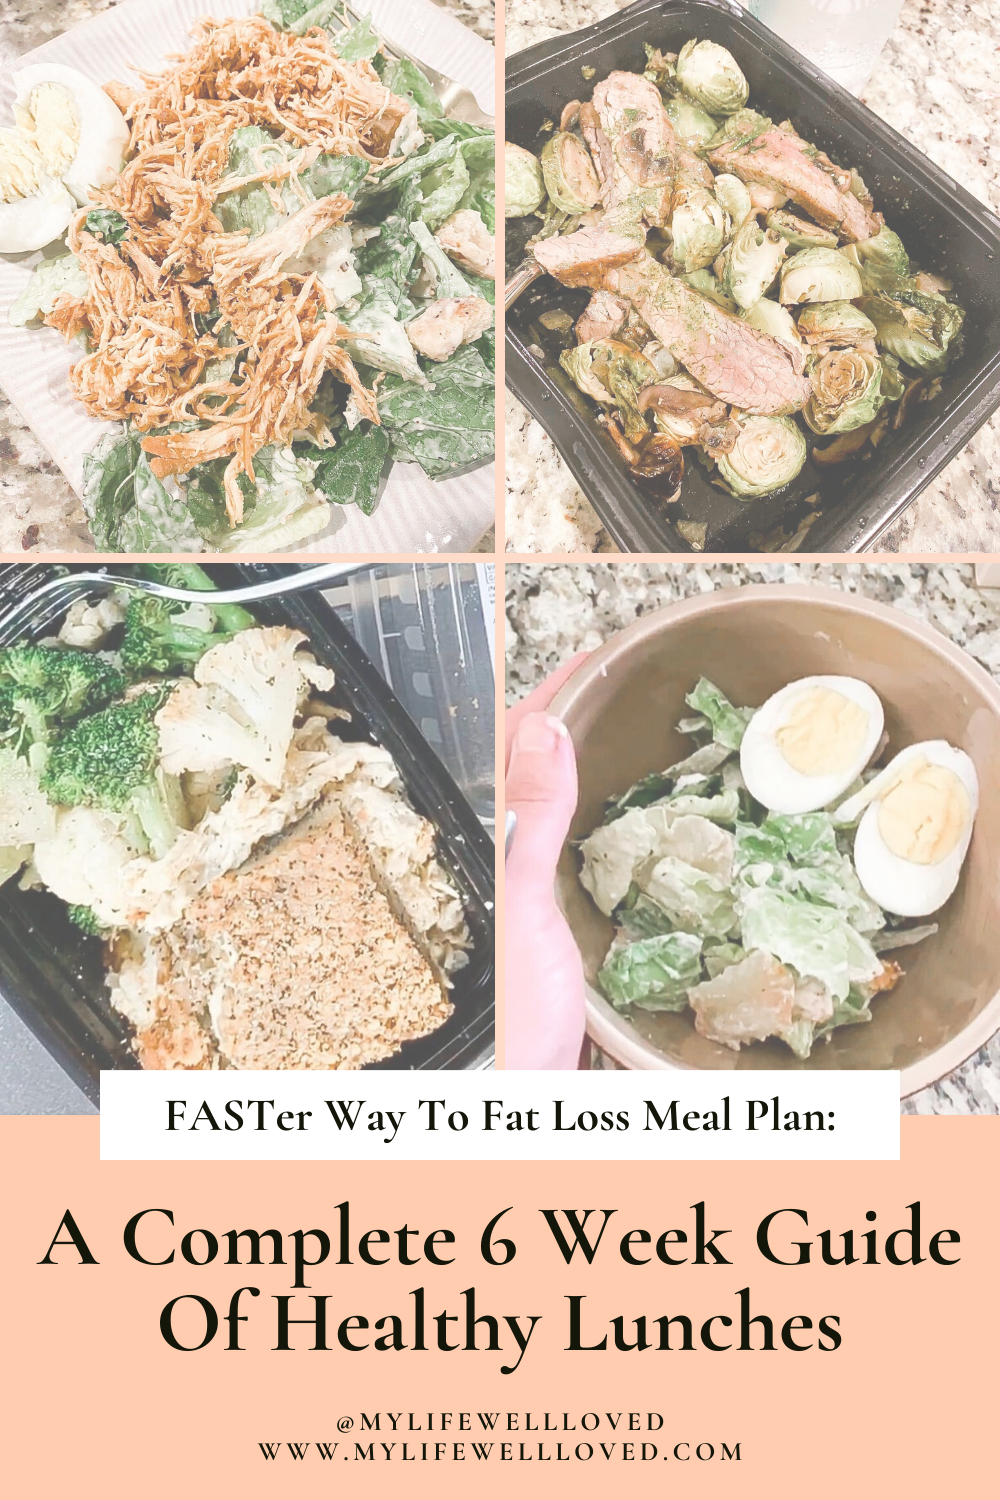 FASTer Way To Fat Loss Meal Plan by Alabama Health + Wellness blogger, Heather Brown // My Life Well Loved